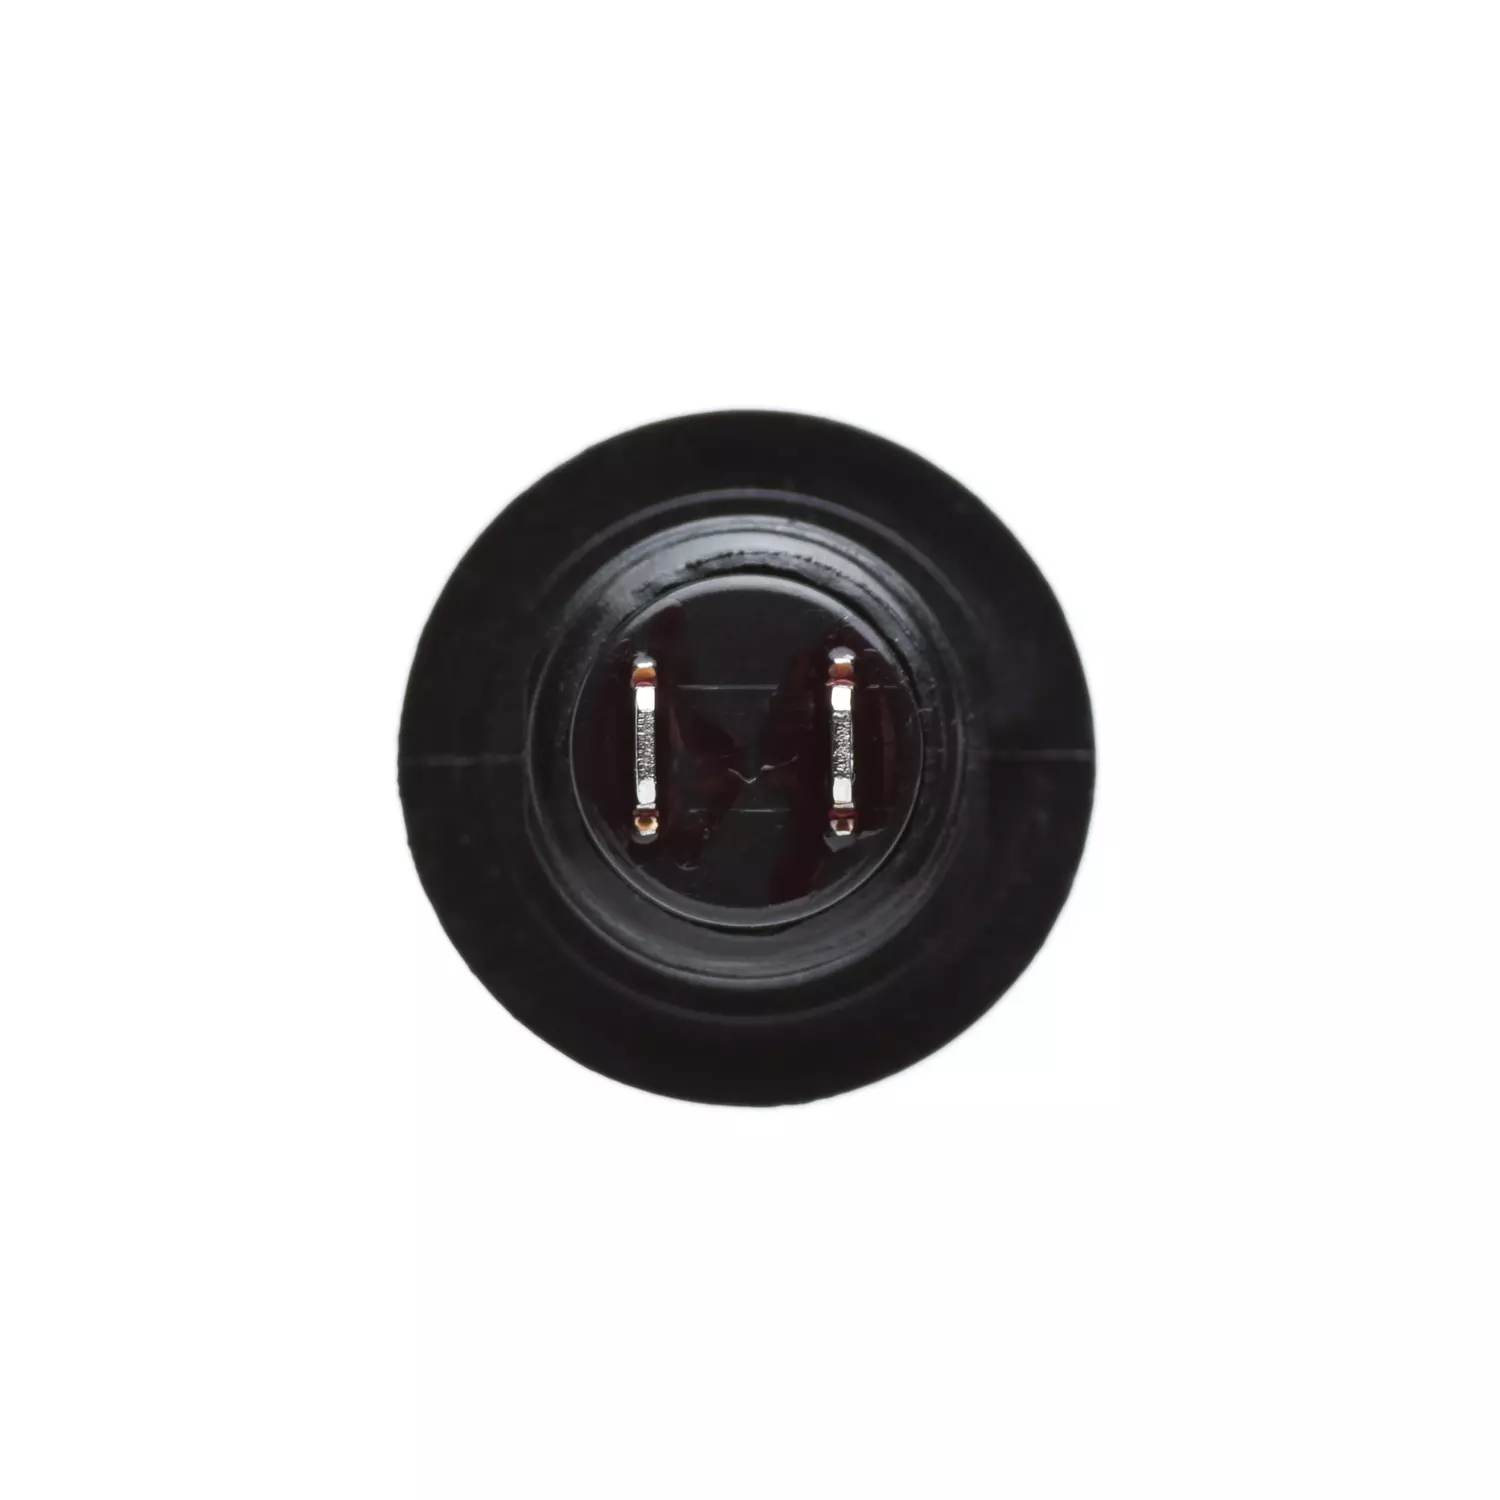 Photo of 12mm Momentary Push Button Dome - Black